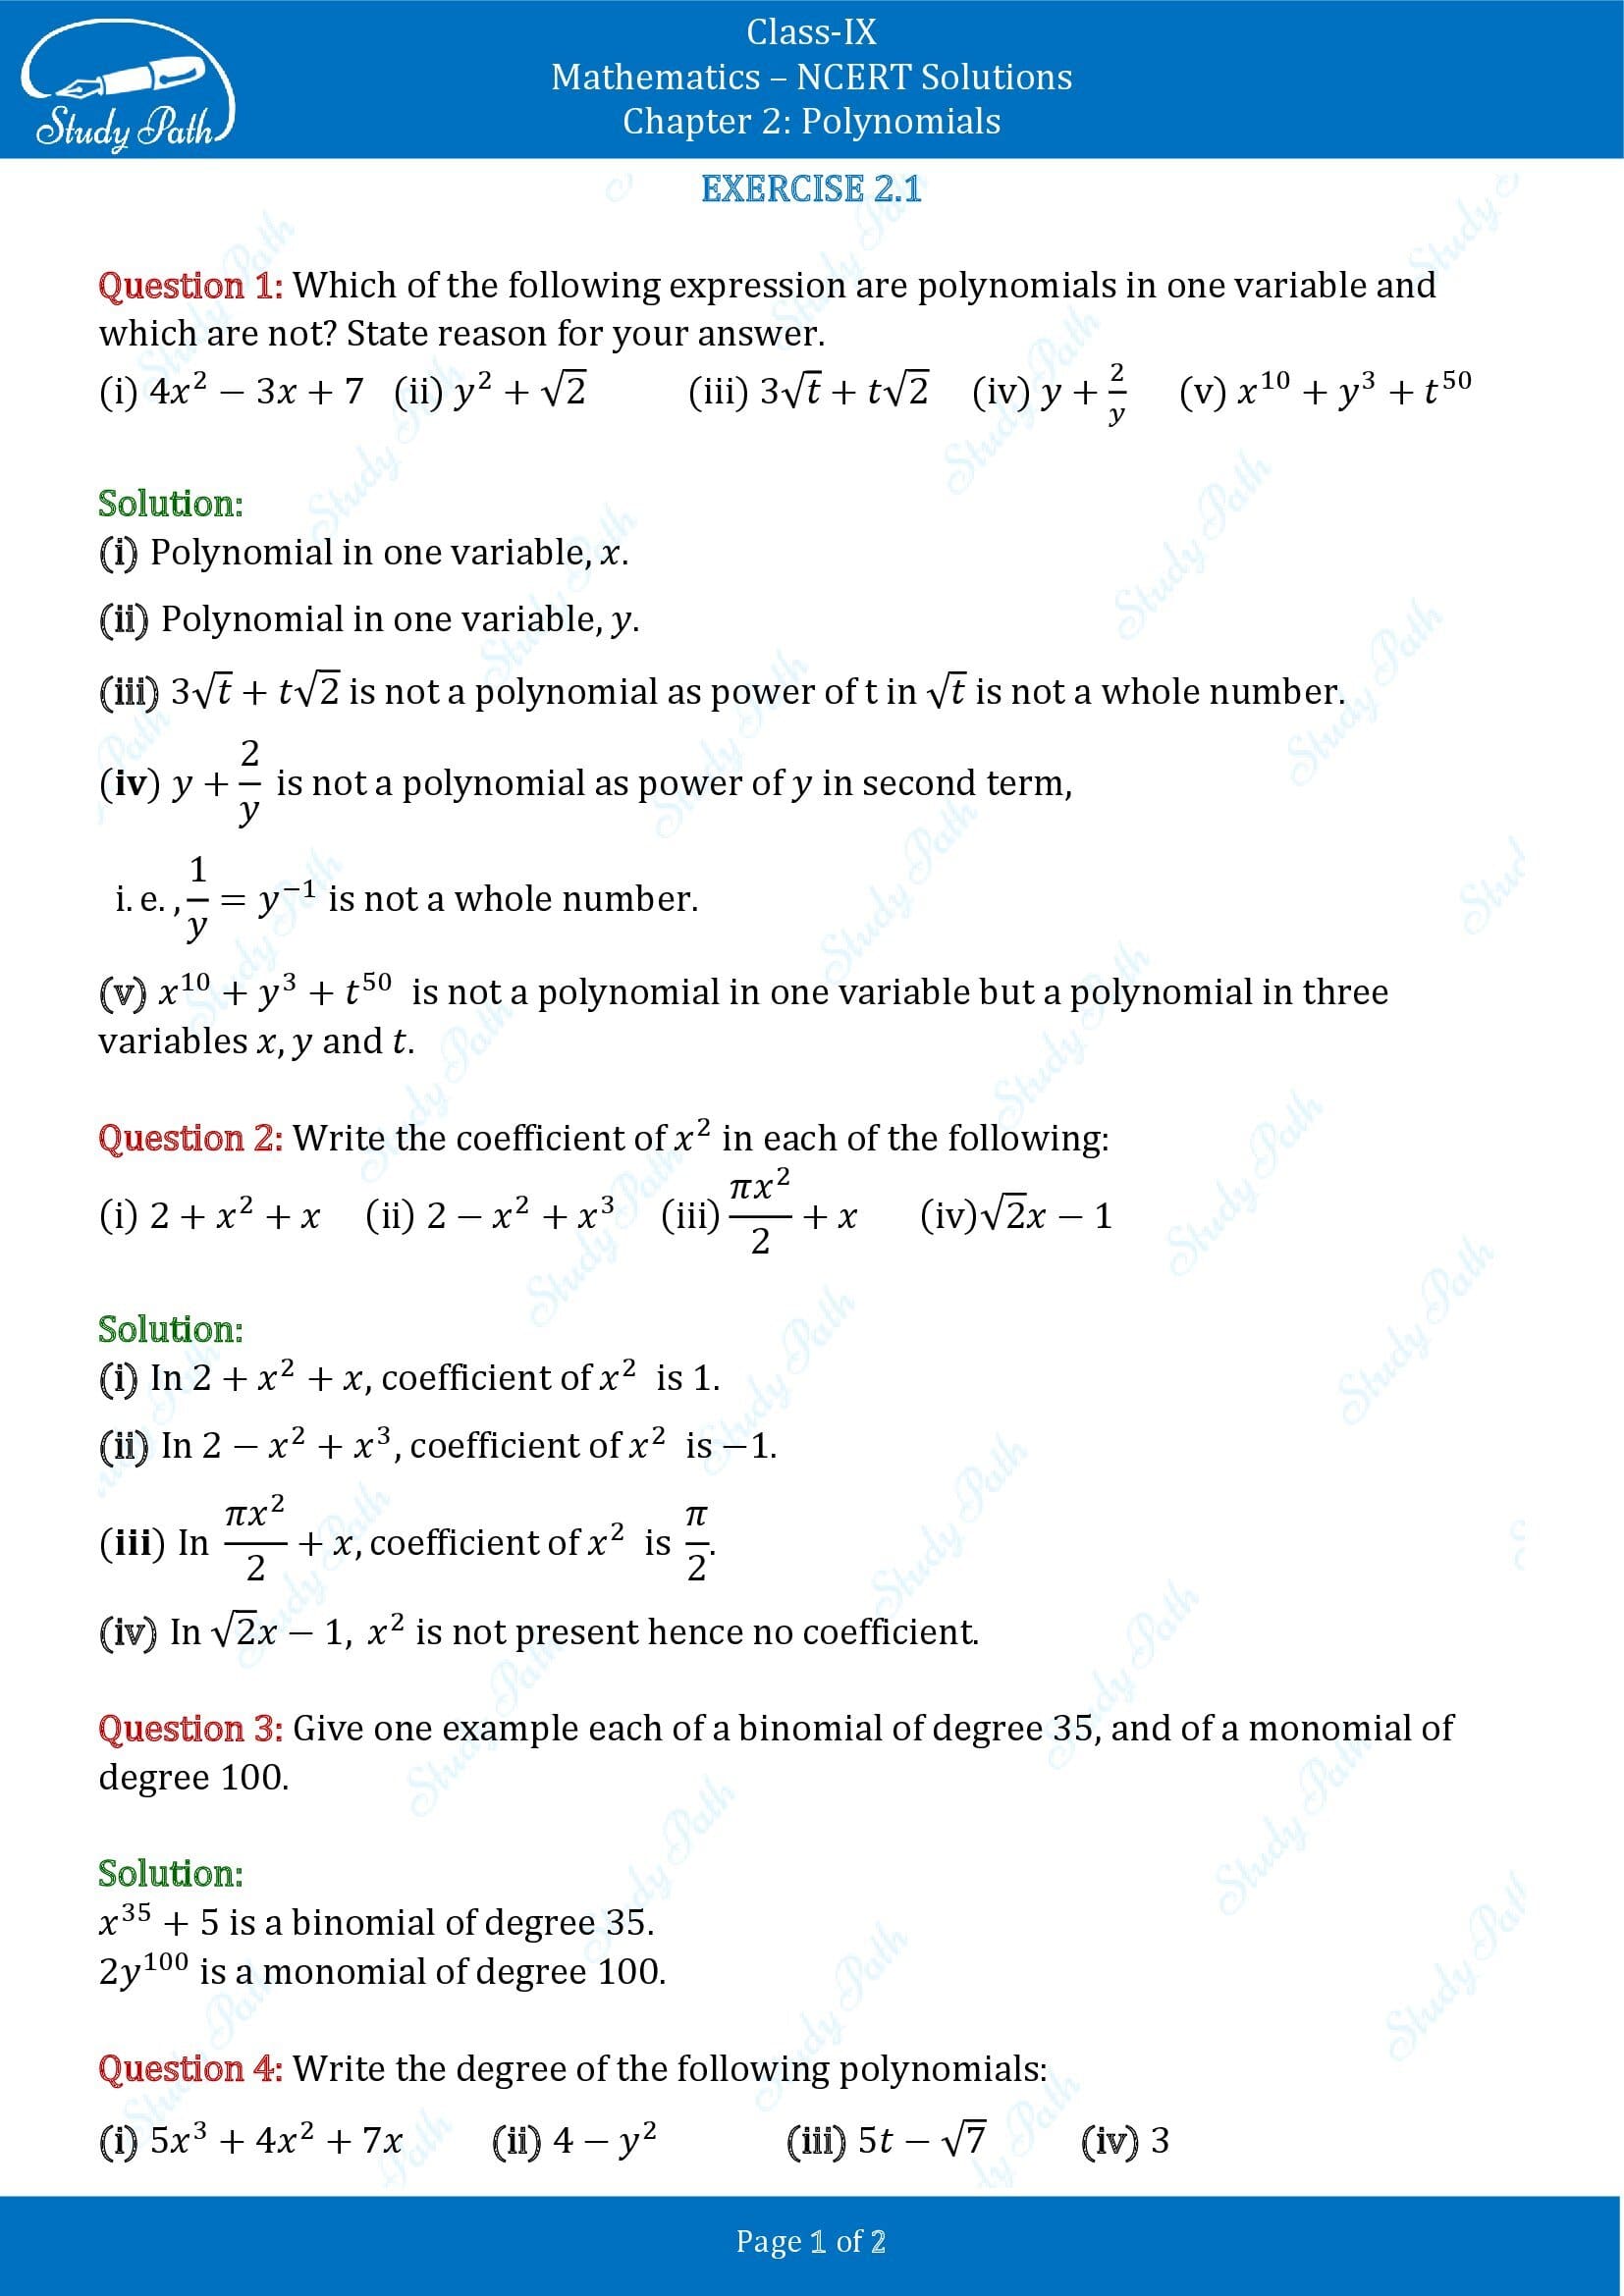 NCERT Solutions for Class 9 Maths Chapter 2 Polynomials Exercise 2.1 00001